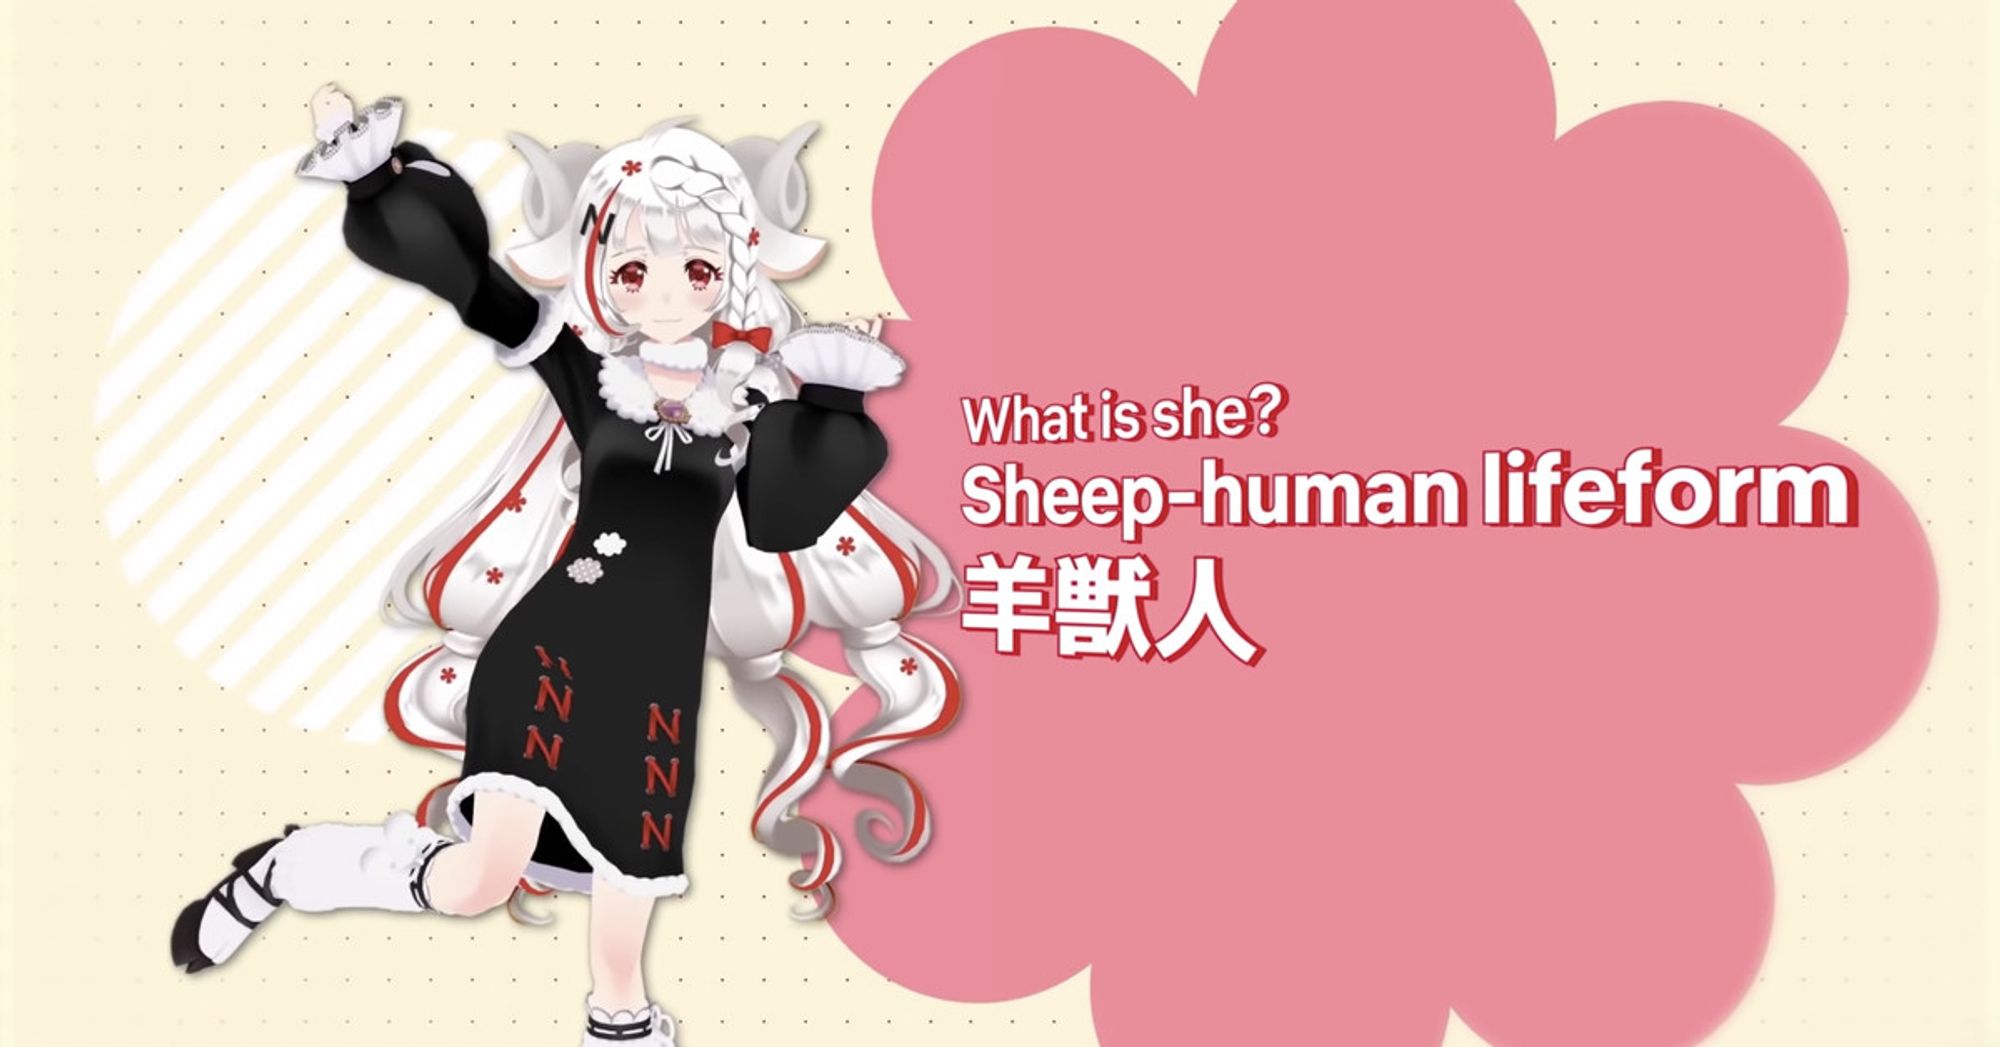 Netflix's official Vtuber is part sheep and promotes anime